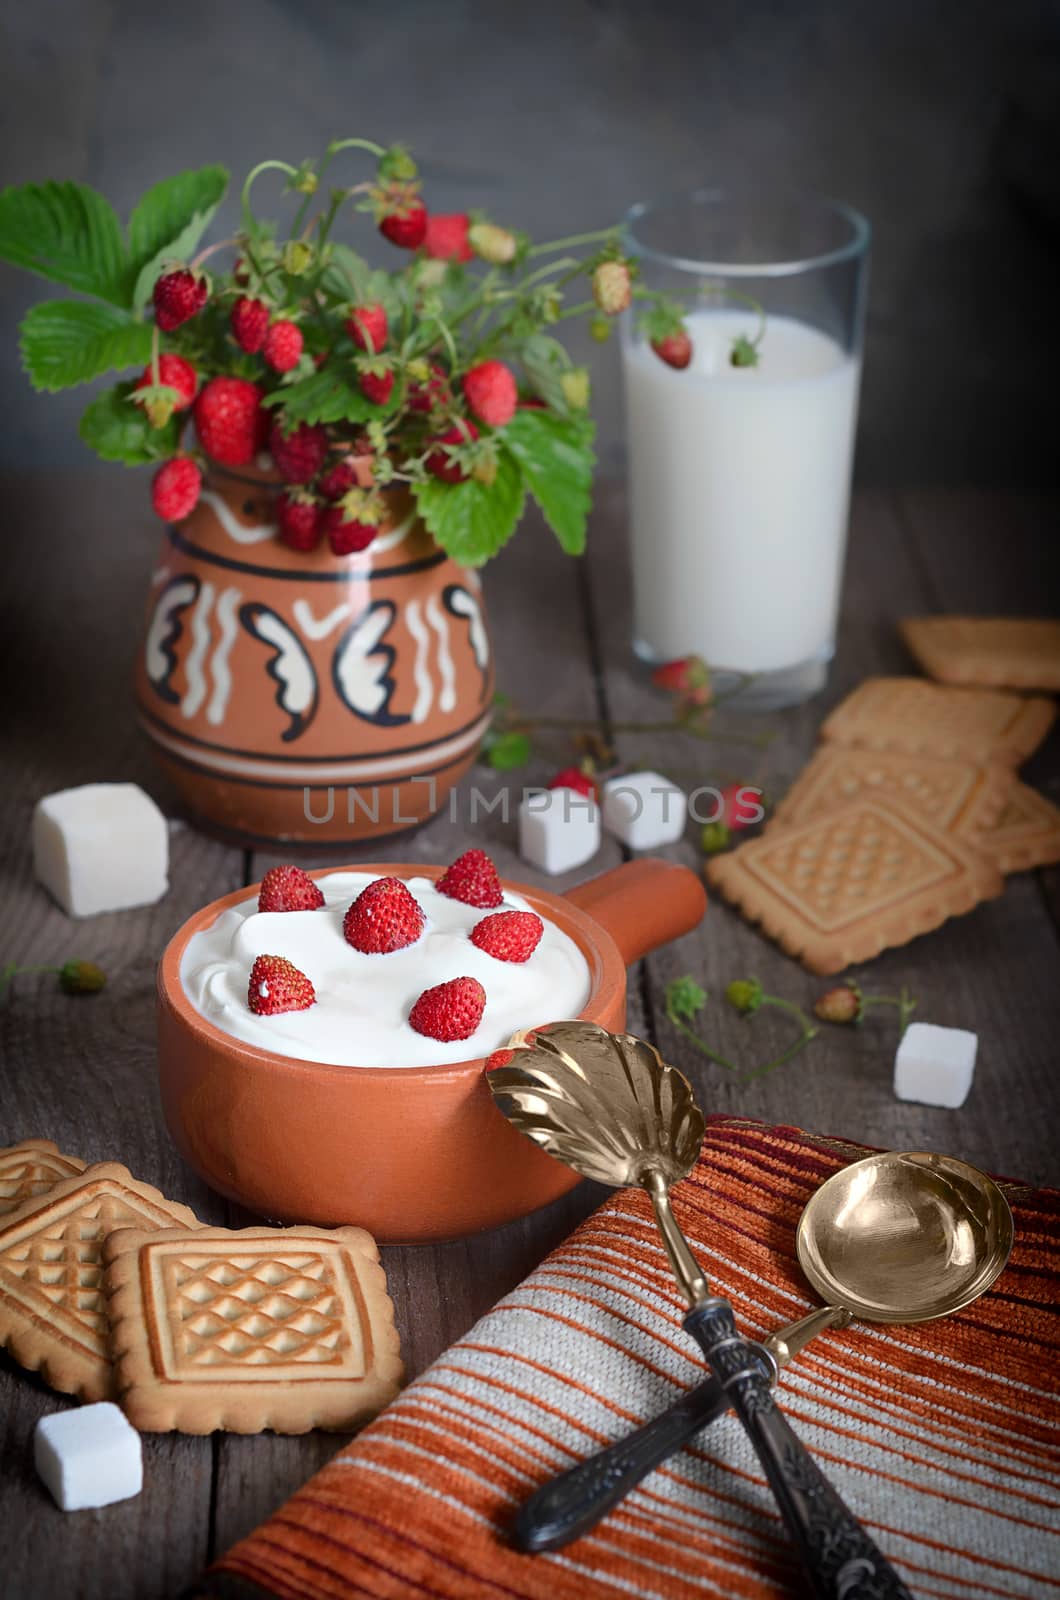 Wild strawberry with cream, cookies and milk, the old rough boards. by Gaina